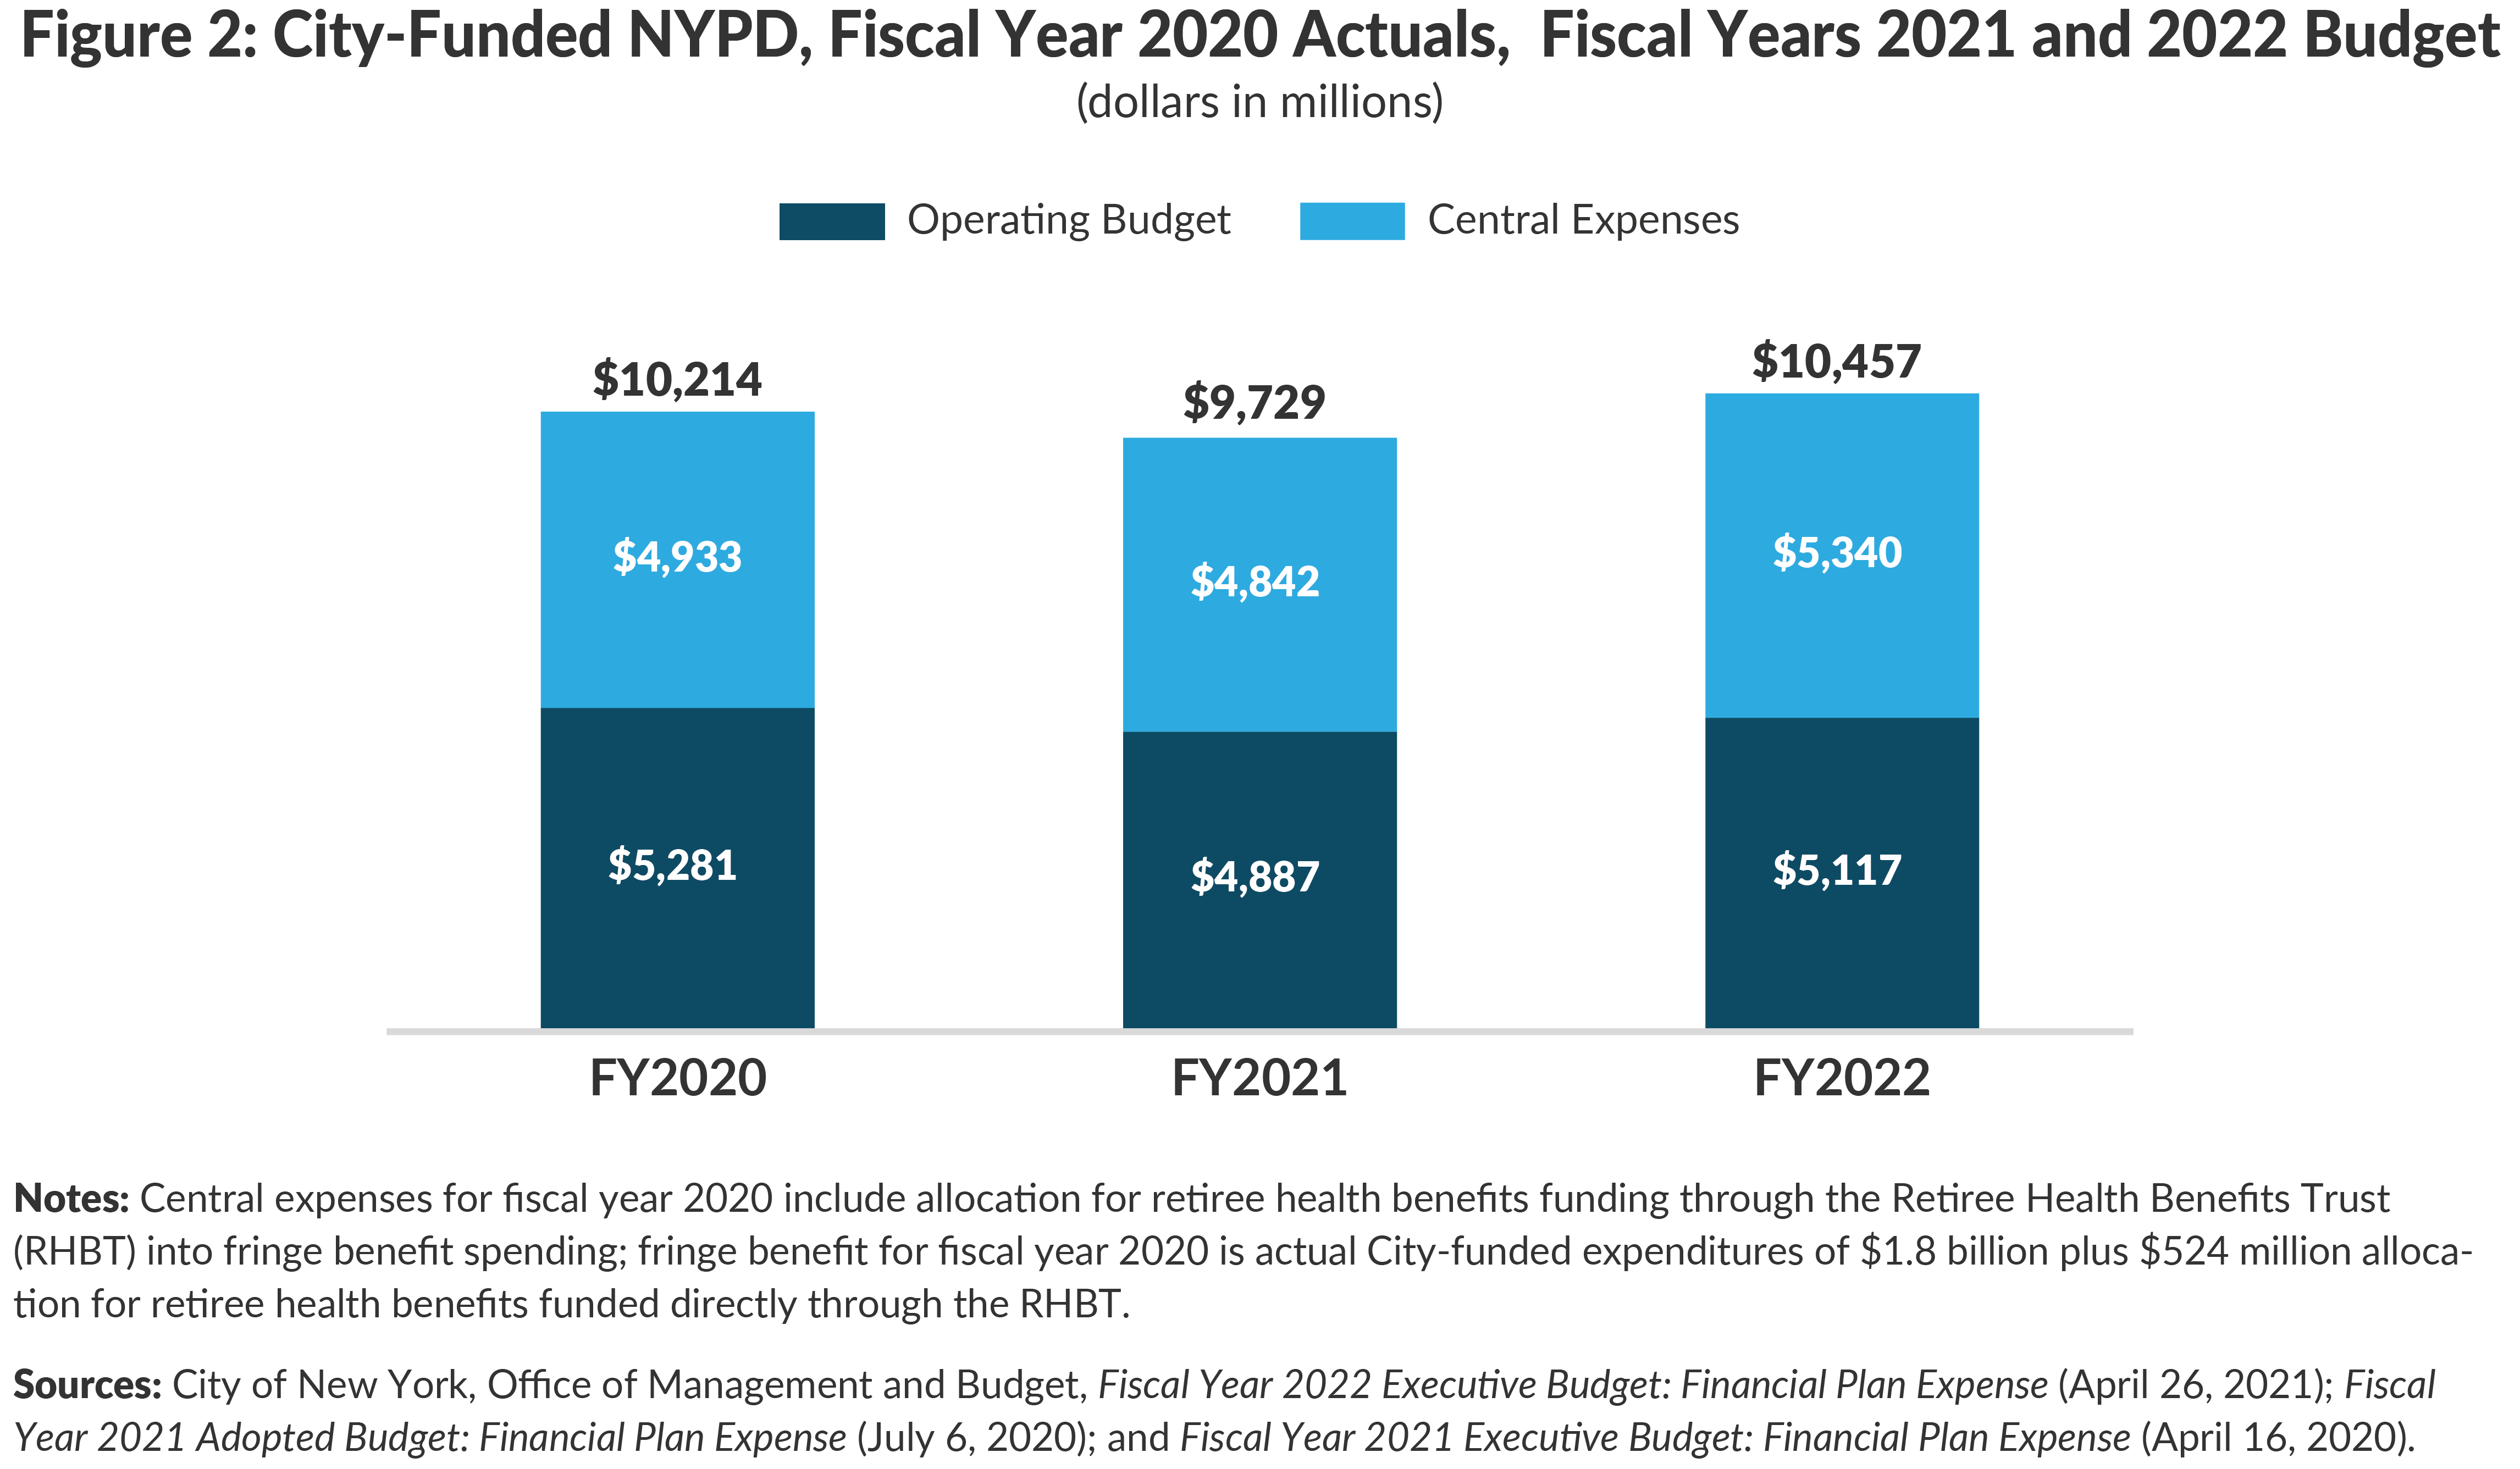 Figure 2. City-Funded New York Police Department Budget,  FY2020 -FY2022 Budget